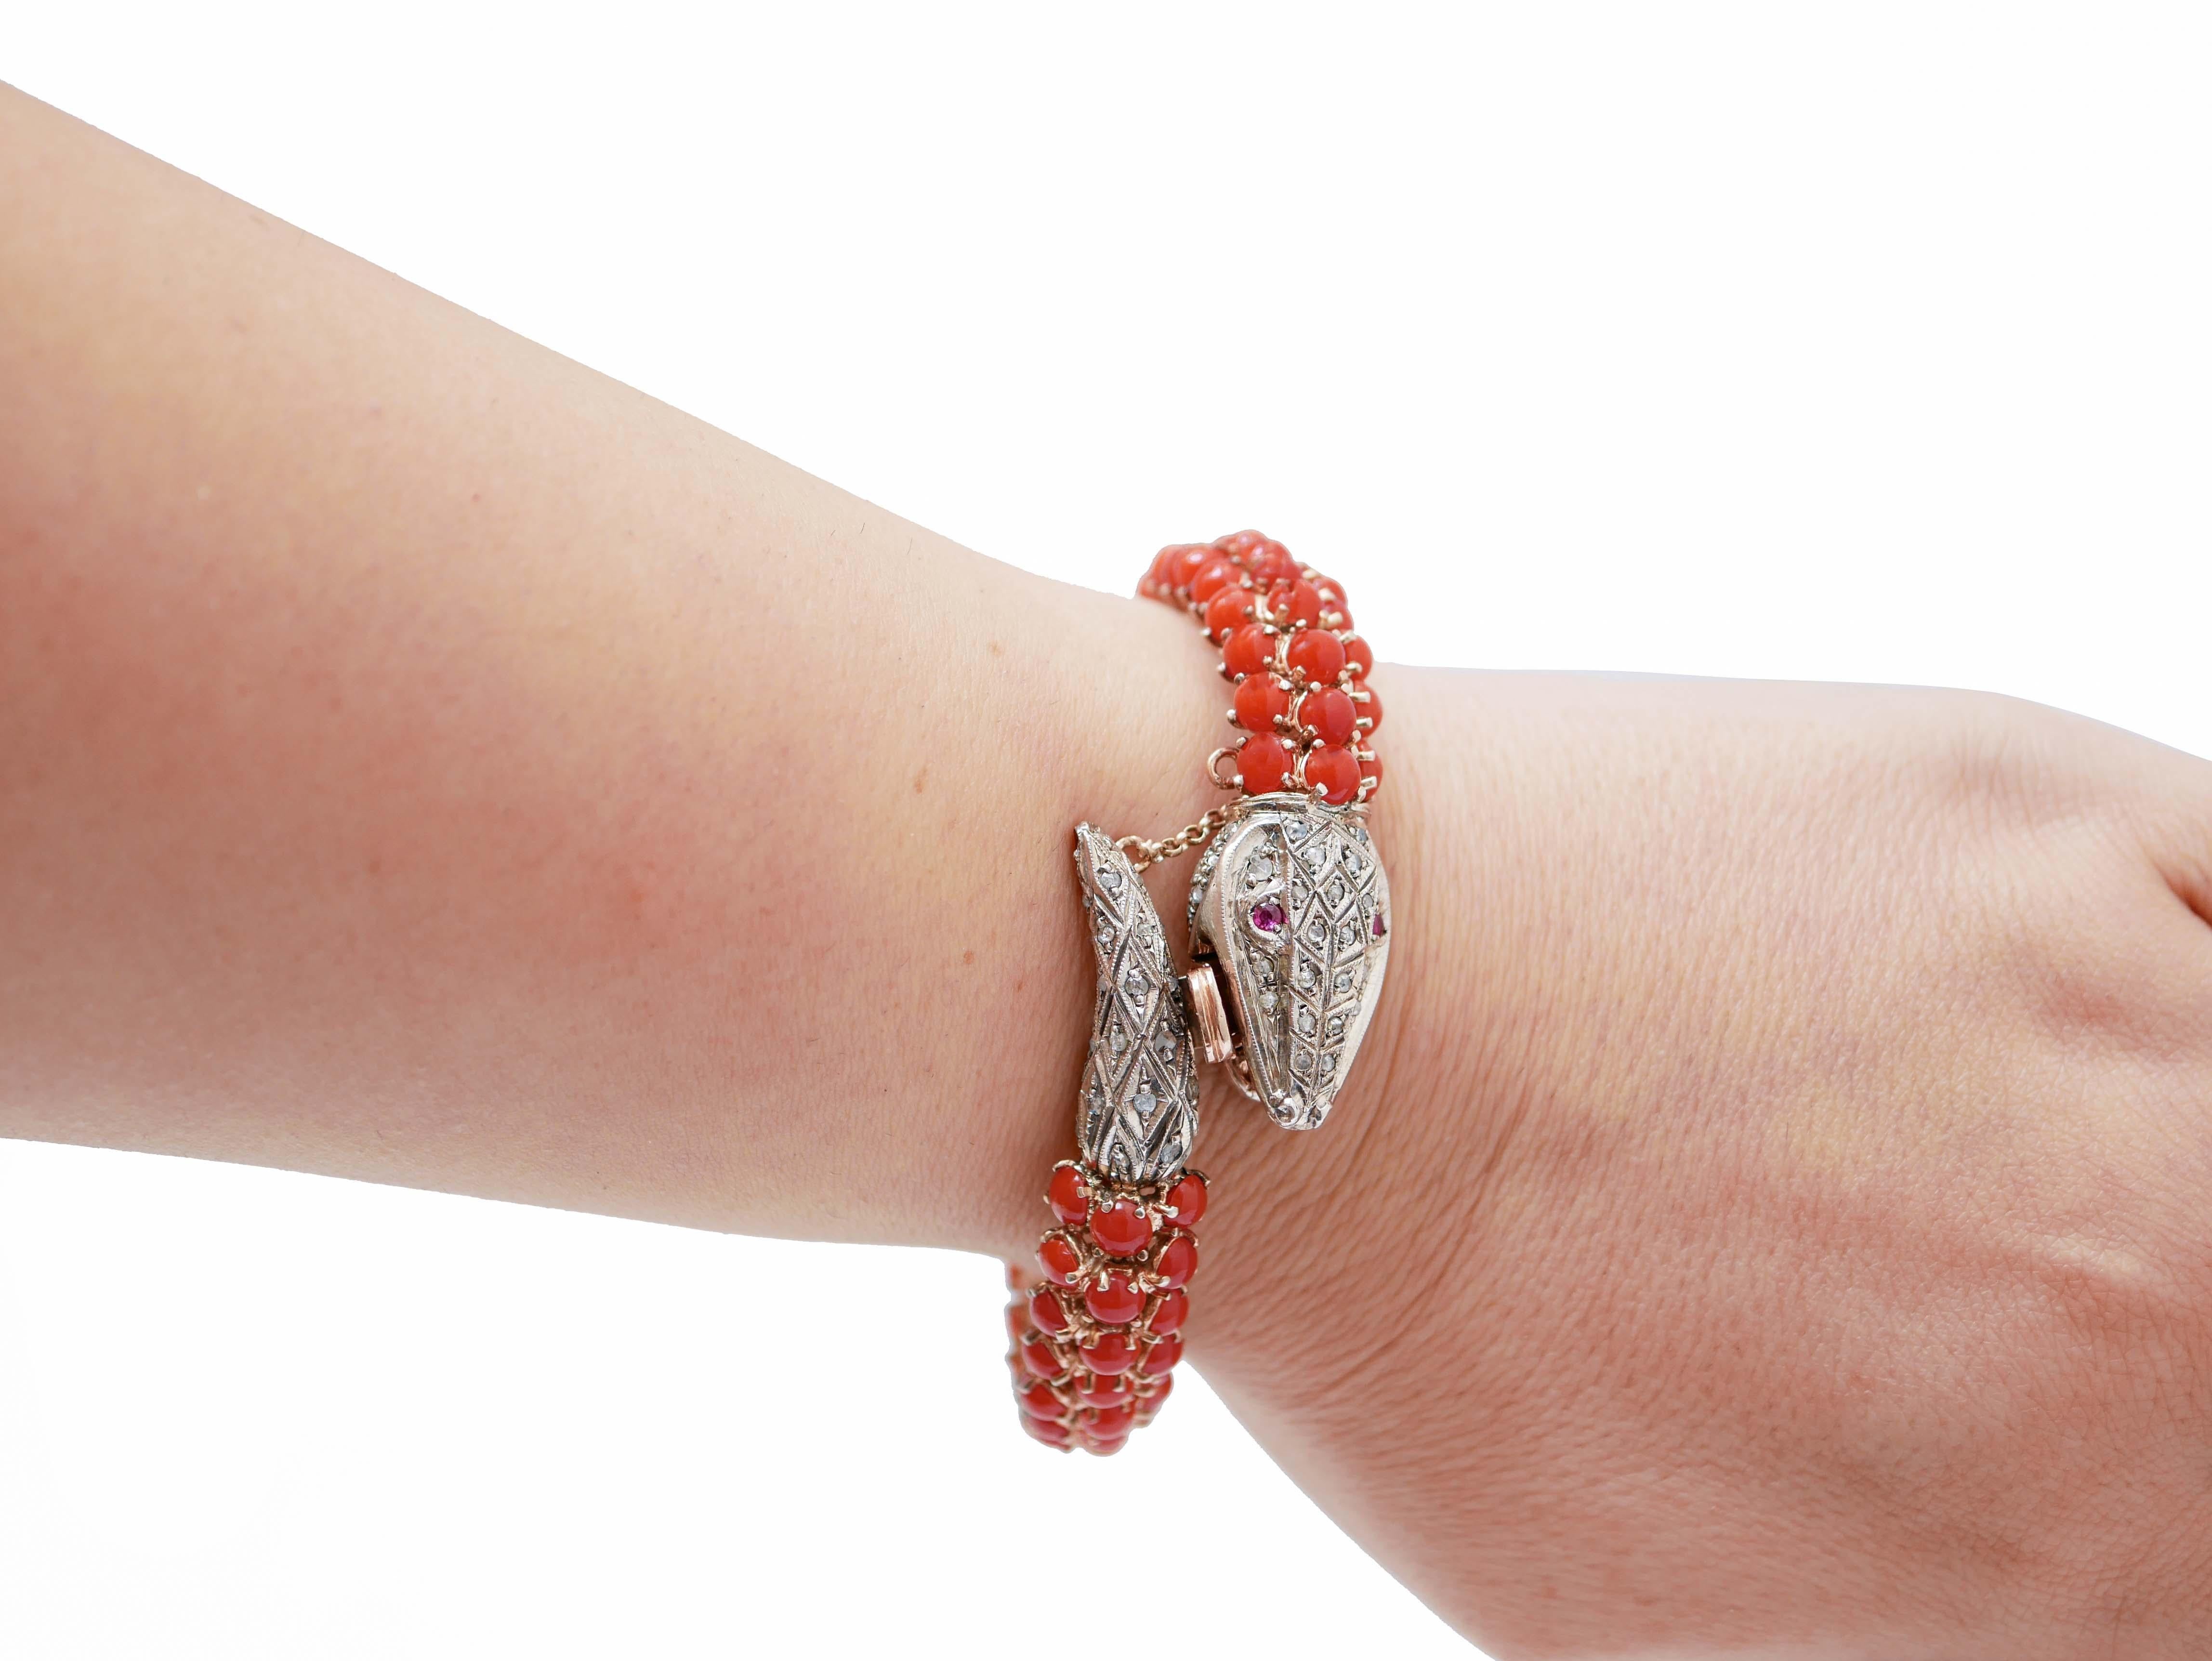 Mixed Cut Coral, Rubies, Diamonds, Rose Gold and Silver Snake Bracelet. For Sale